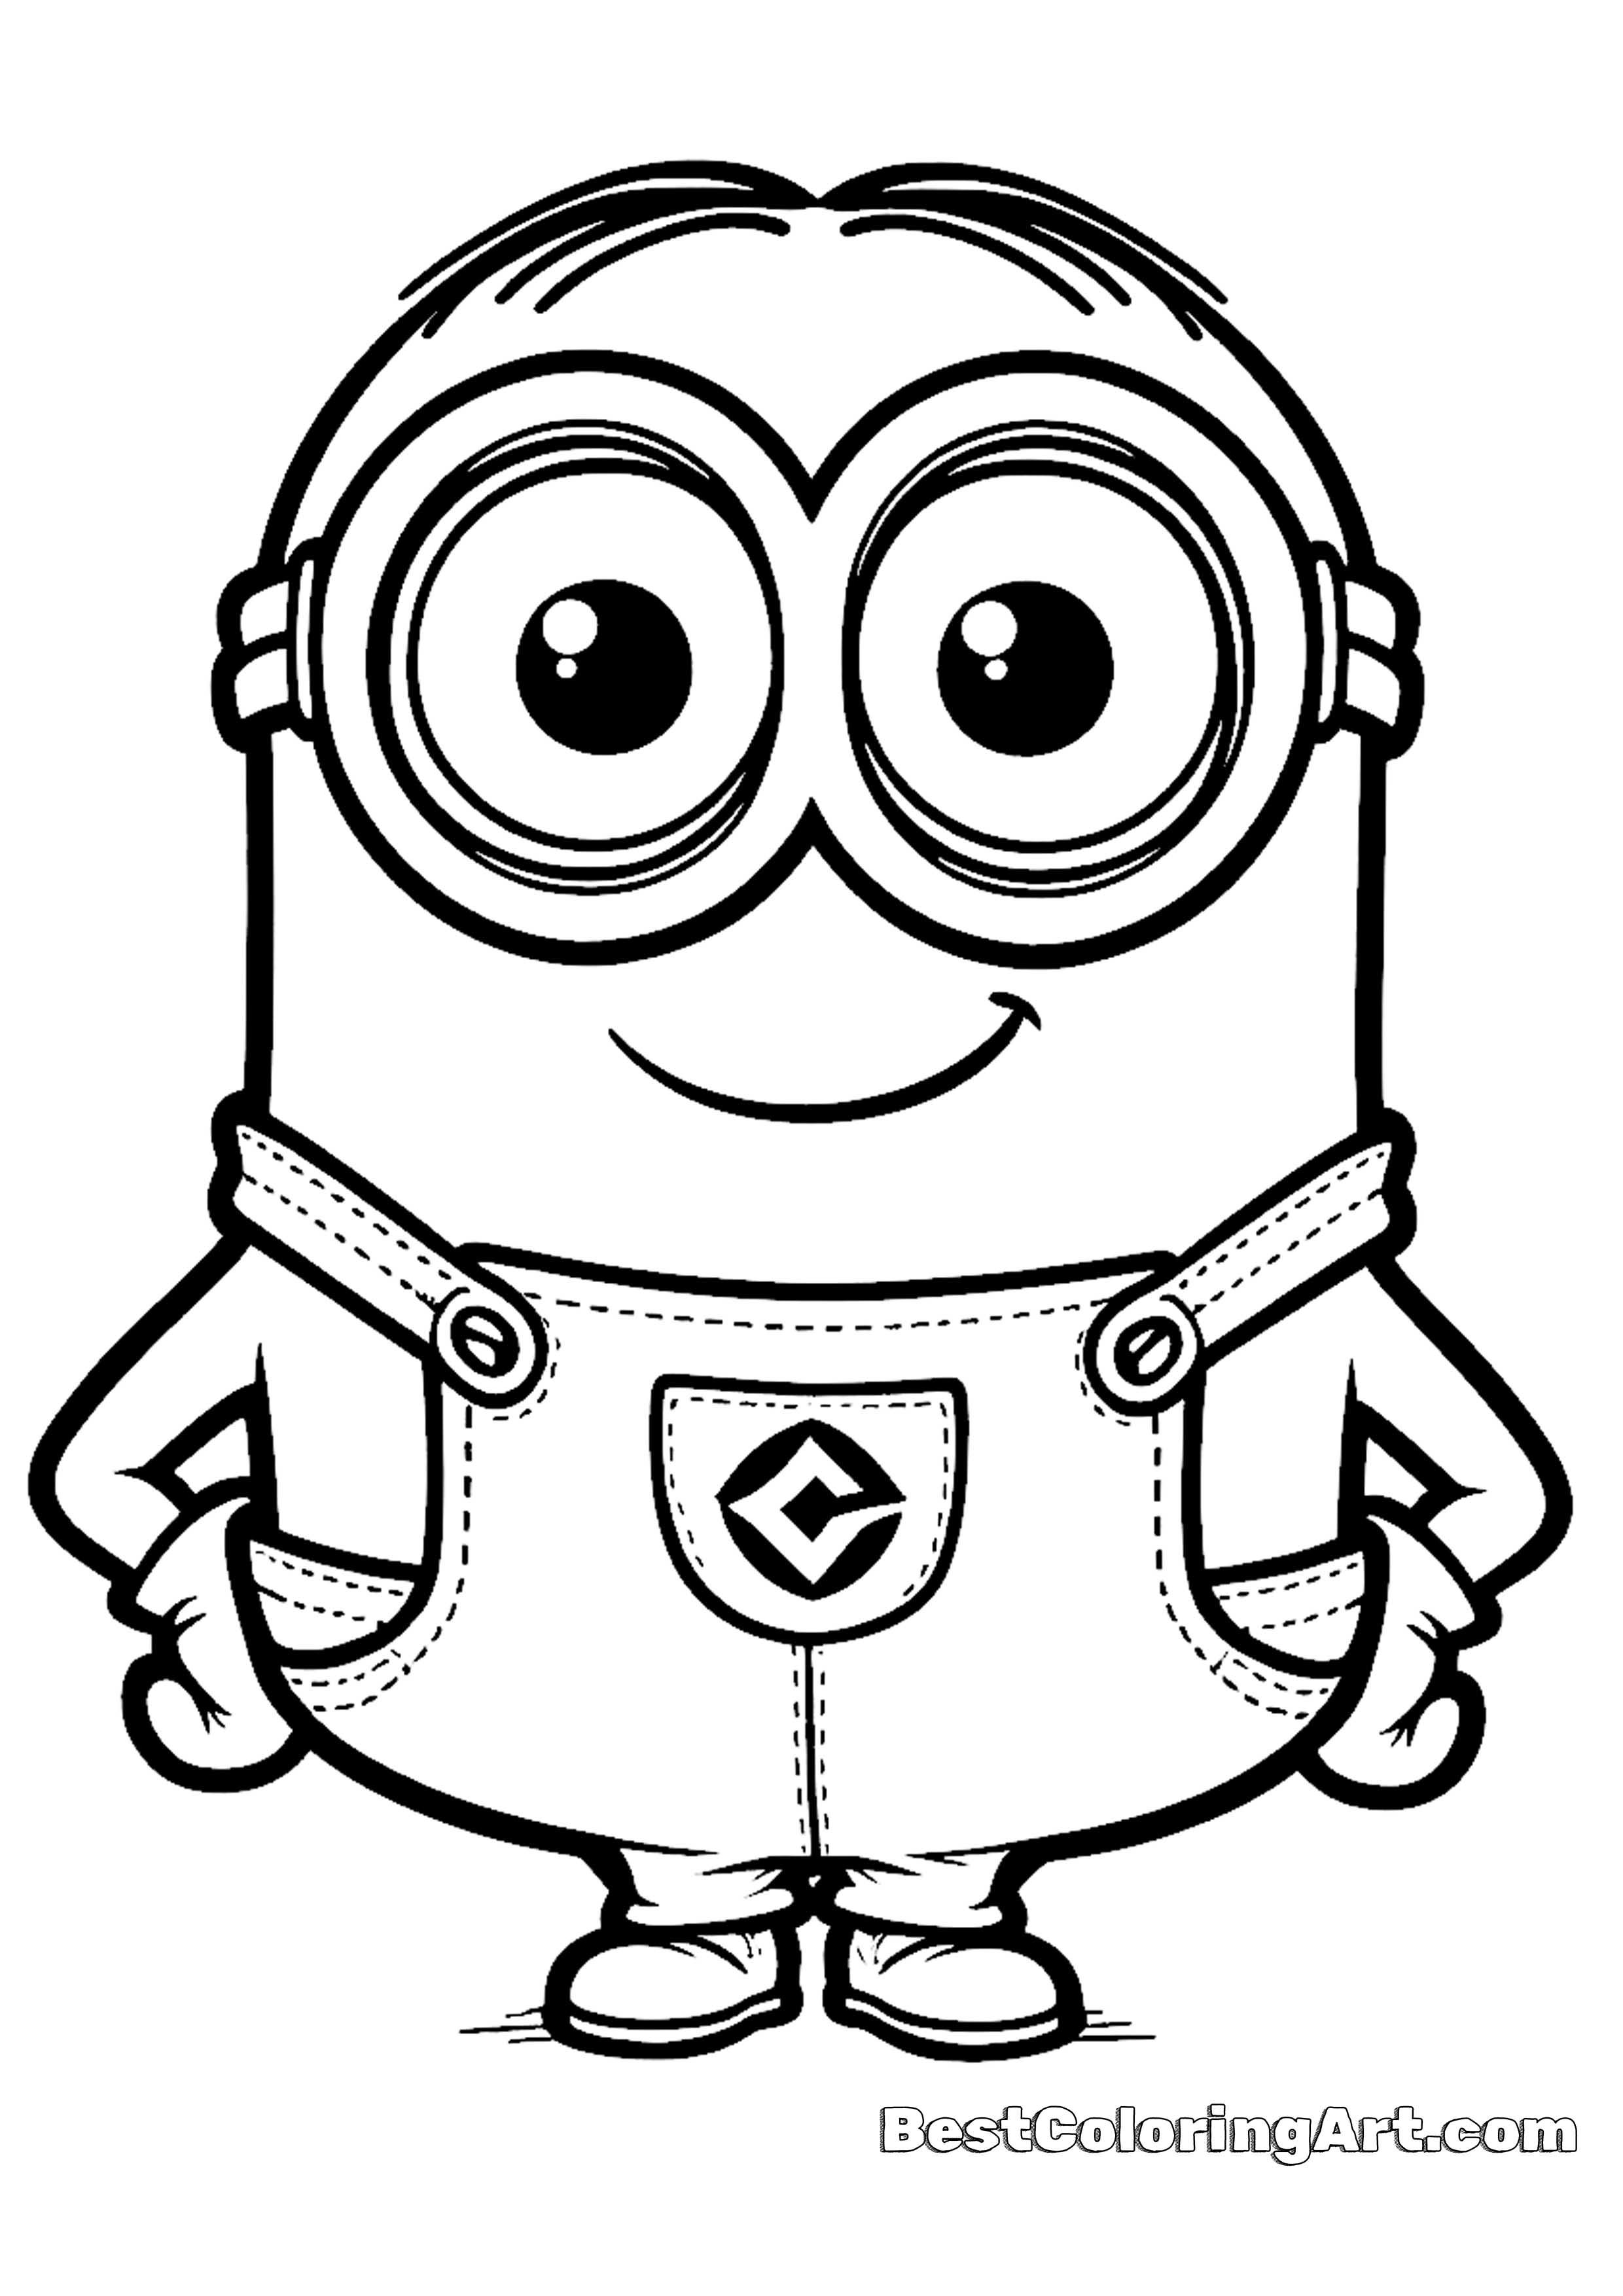 Laughing minion Coloring Page - Printable & Free PDFs